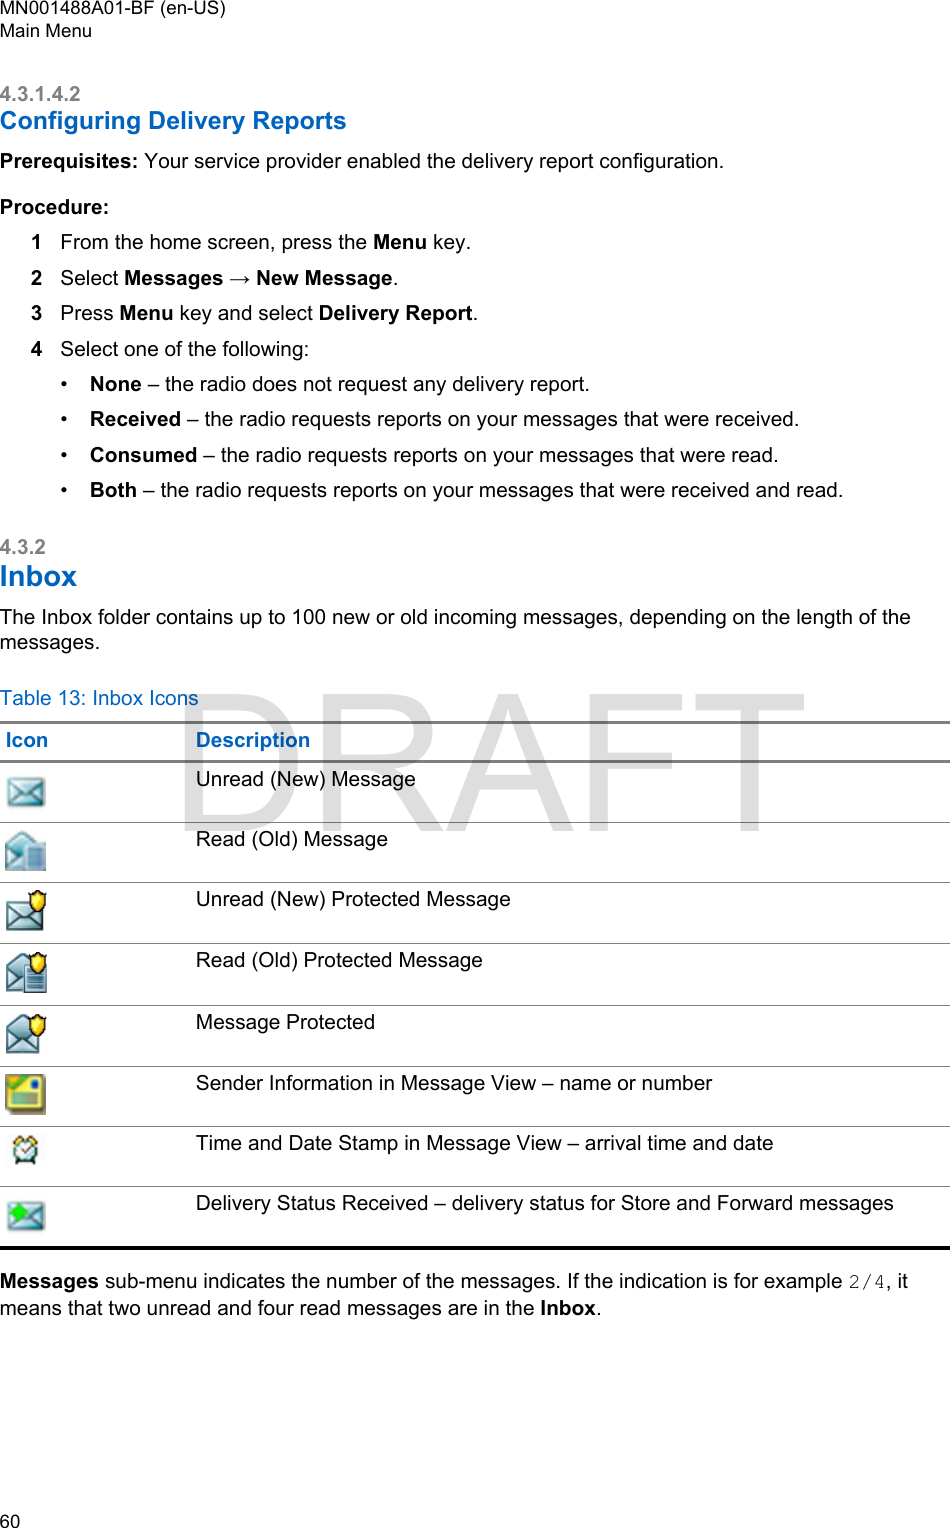 4.3.1.4.2Configuring Delivery ReportsPrerequisites: Your service provider enabled the delivery report configuration.Procedure:1From the home screen, press the Menu key.2Select Messages → New Message.3Press Menu key and select Delivery Report.4Select one of the following:•None – the radio does not request any delivery report.•Received – the radio requests reports on your messages that were received.•Consumed – the radio requests reports on your messages that were read.•Both – the radio requests reports on your messages that were received and read.4.3.2InboxThe Inbox folder contains up to 100 new or old incoming messages, depending on the length of themessages.Table 13: Inbox IconsIcon DescriptionUnread (New) MessageRead (Old) MessageUnread (New) Protected MessageRead (Old) Protected MessageMessage ProtectedSender Information in Message View – name or numberTime and Date Stamp in Message View – arrival time and dateDelivery Status Received – delivery status for Store and Forward messagesMessages sub-menu indicates the number of the messages. If the indication is for example 2/4, itmeans that two unread and four read messages are in the Inbox.MN001488A01-BF (en-US)Main Menu60  DRAFT